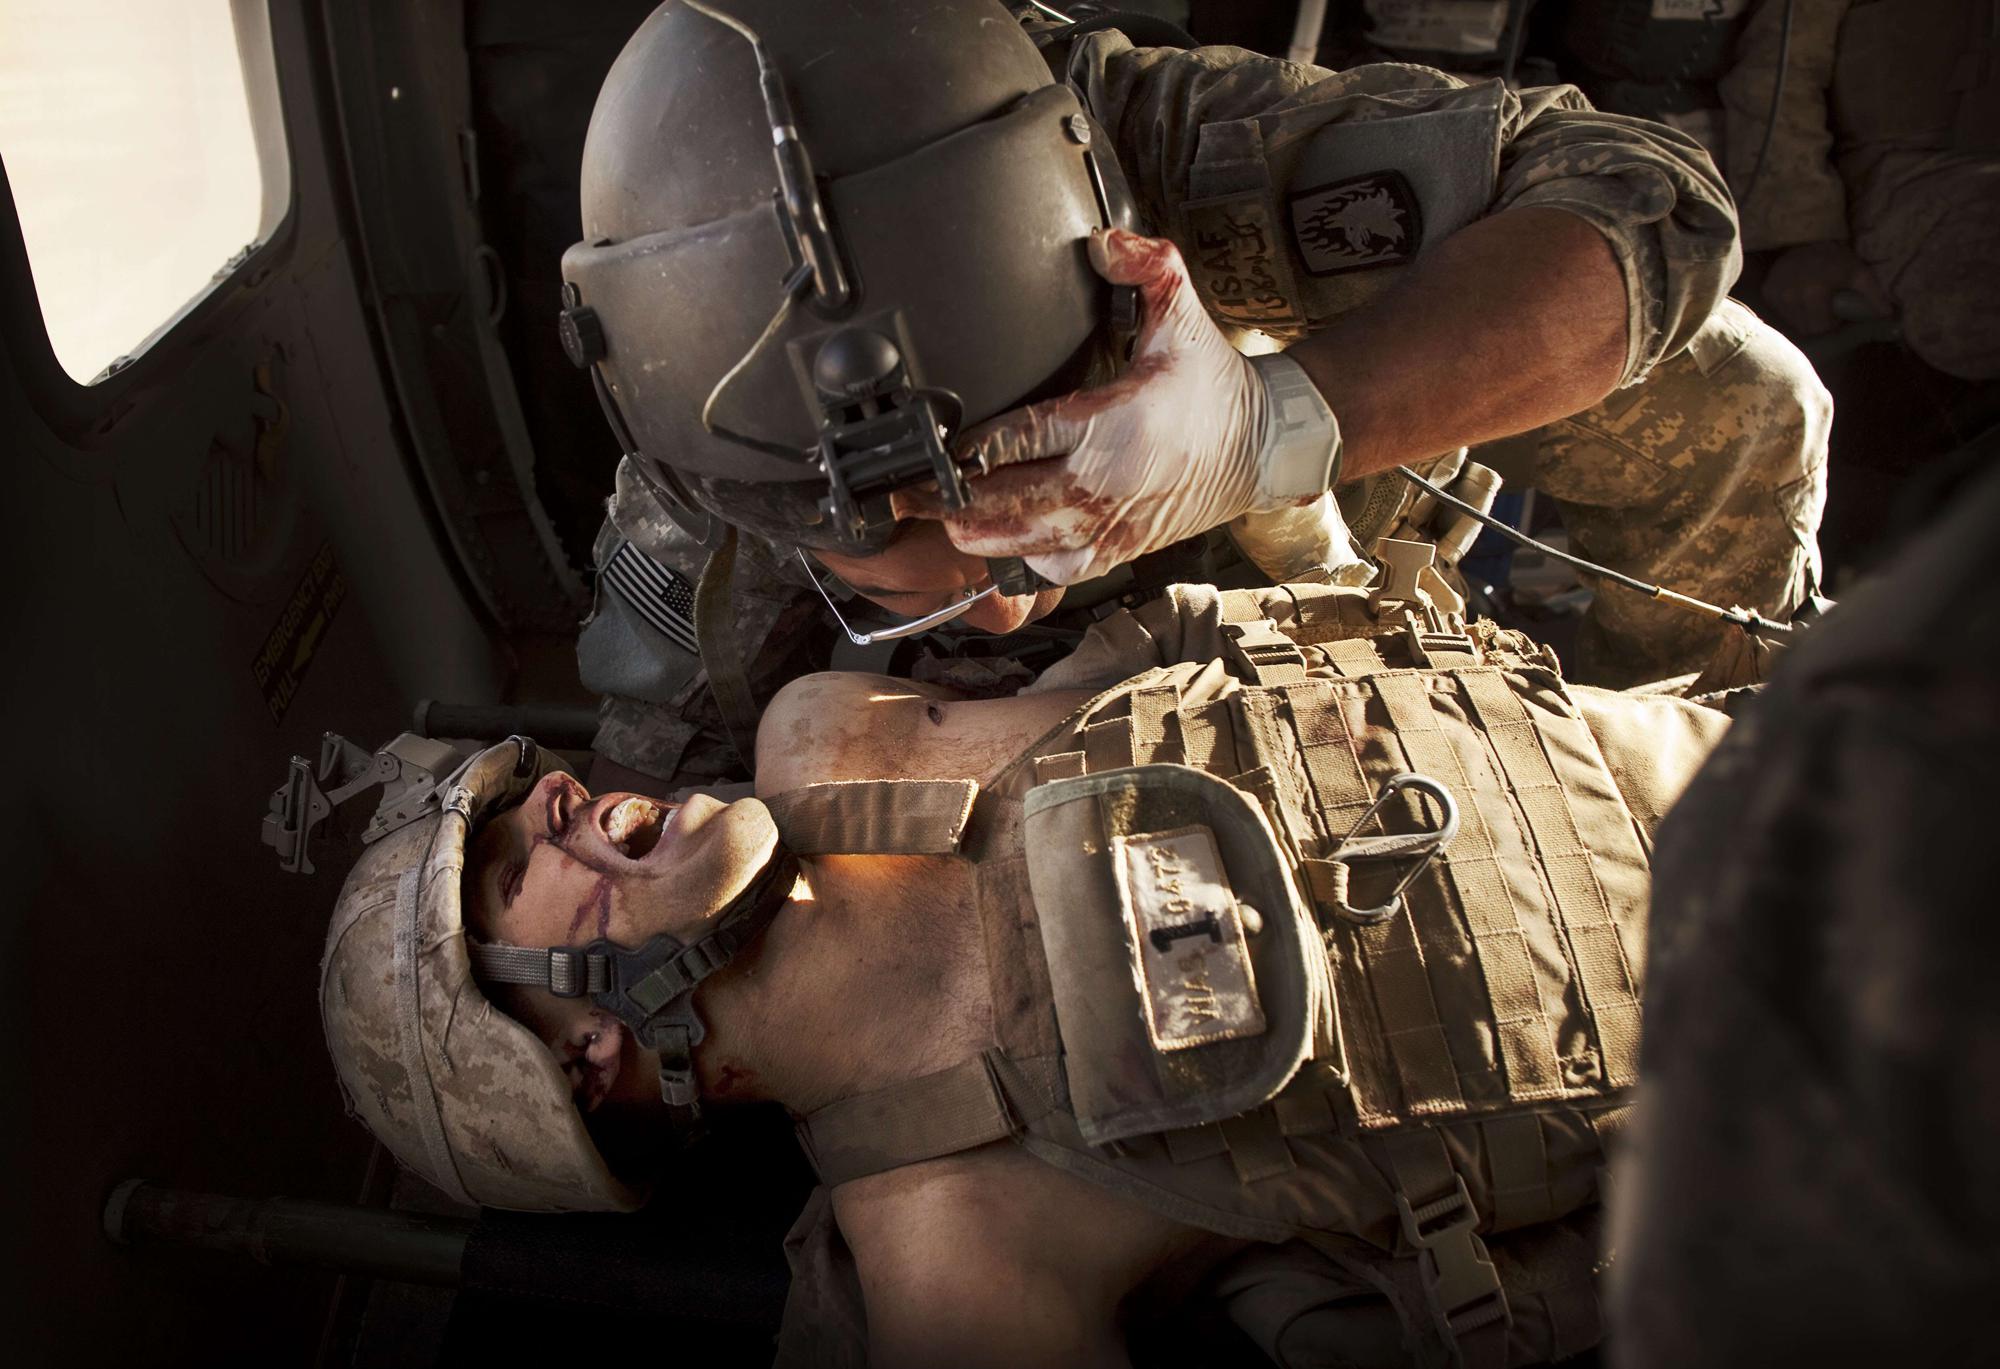 U.S. Army flight medic SGT Jaime Adame, top, cares for seriously wounded Marine CPL Andrew Smith following an insurgent attack on board a medevac helicopter Sunday, May 15, 2011, from the U.S. Army's Task Force Lift "Dust Off", Charlie Company 1-214 Aviation Regiment north of Sangin, in the volatile Helmand Province of southern Afghanistan. (AP Photo/Kevin Frayer)